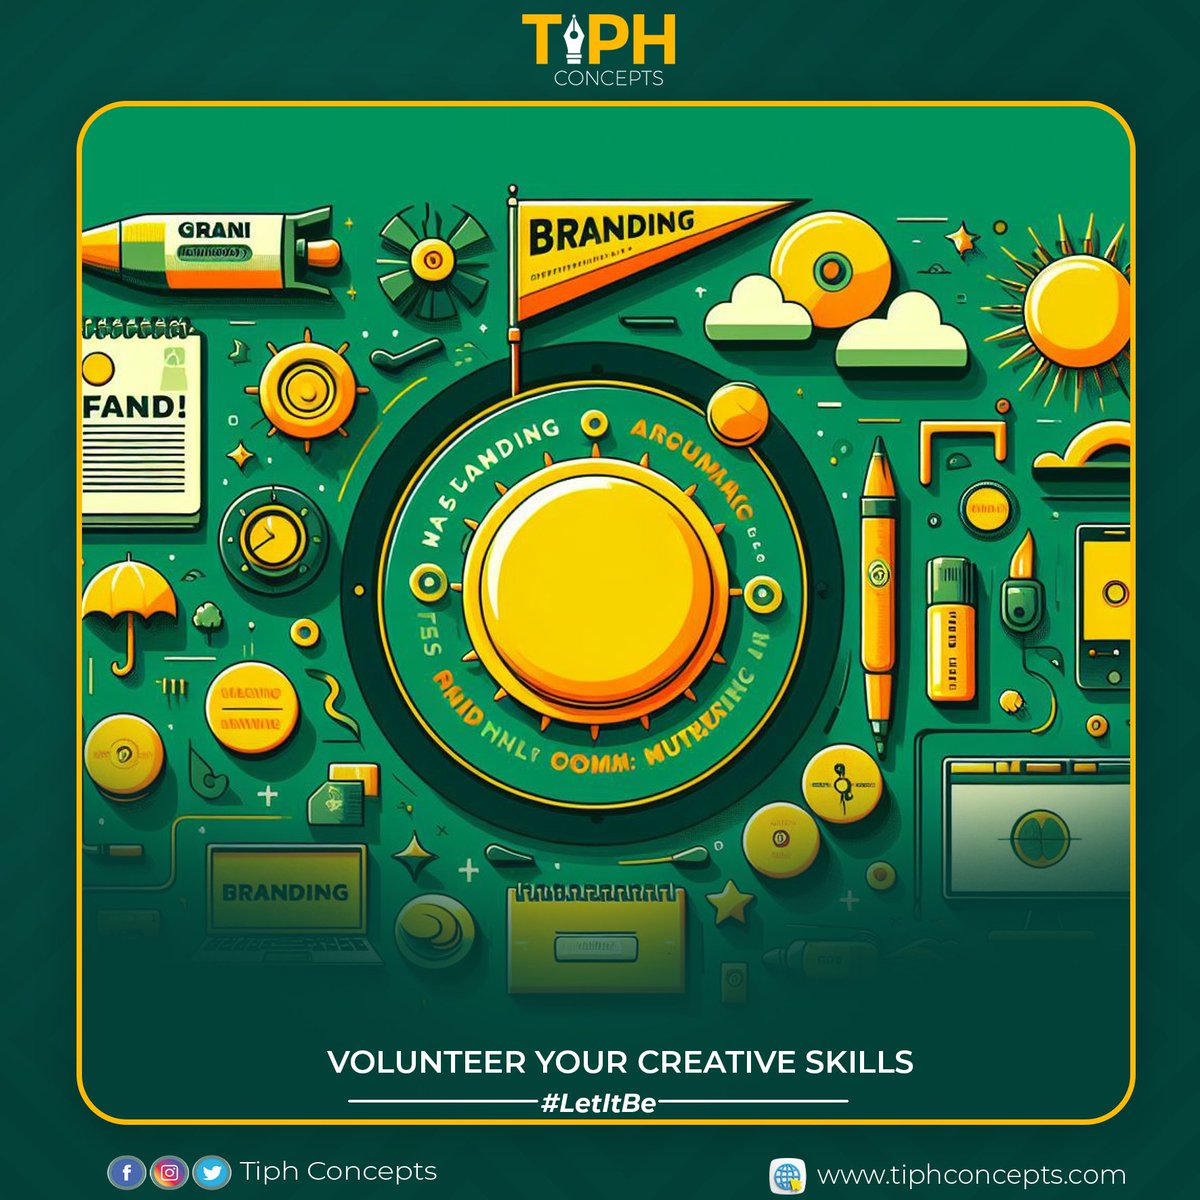 Volunteer your creative skills
Volunteering to help friends or coworkers with projects is a good way to work on your skills. Request feedback on each project and use it to improve in the areas you listed before. #graphics #brighton #greenwood #tiphconcepts